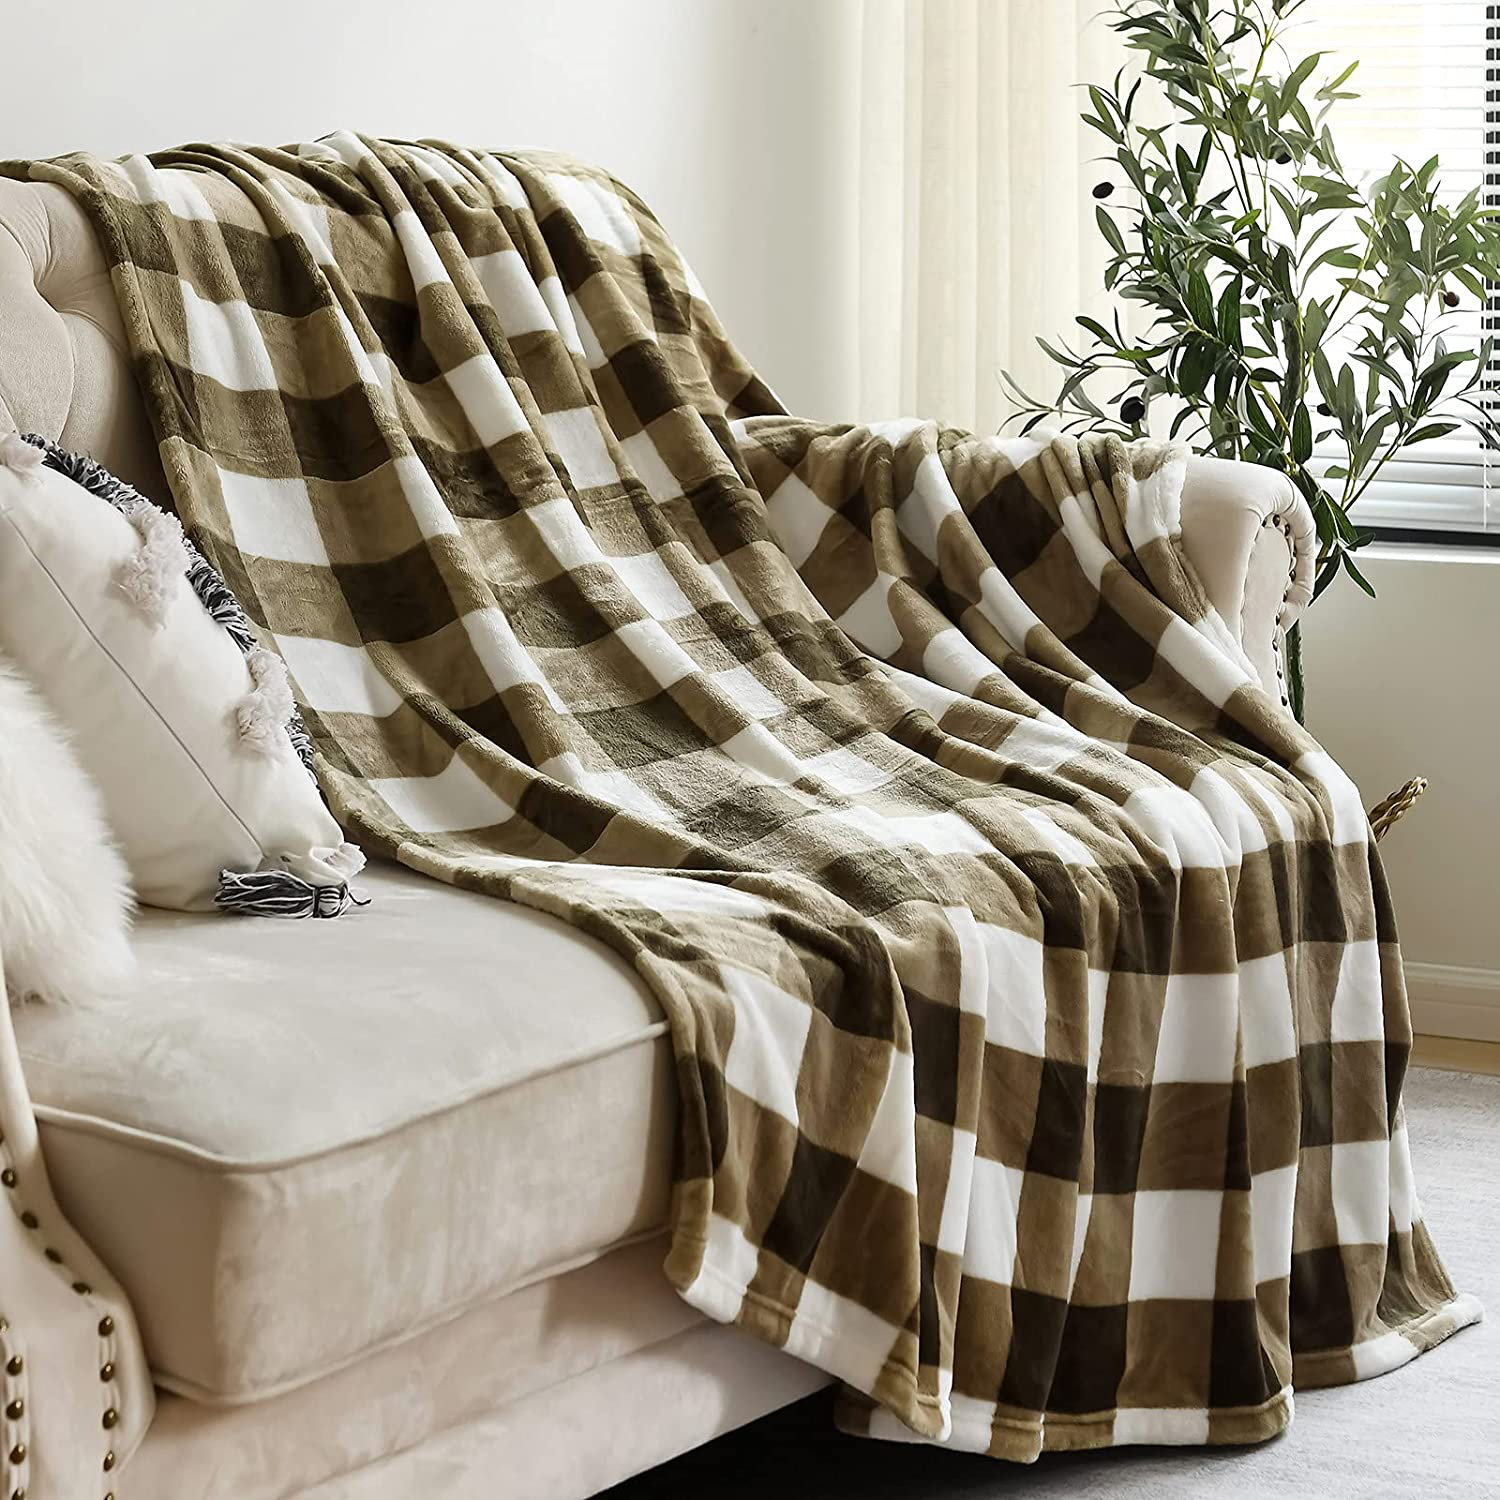 All Season Warm and Comfortable Anti-Pilling Flannel 40x50 Flowers Seamless Blanket Ultra-Soft Lightweight Flannel Blanket Sofa Sofa 